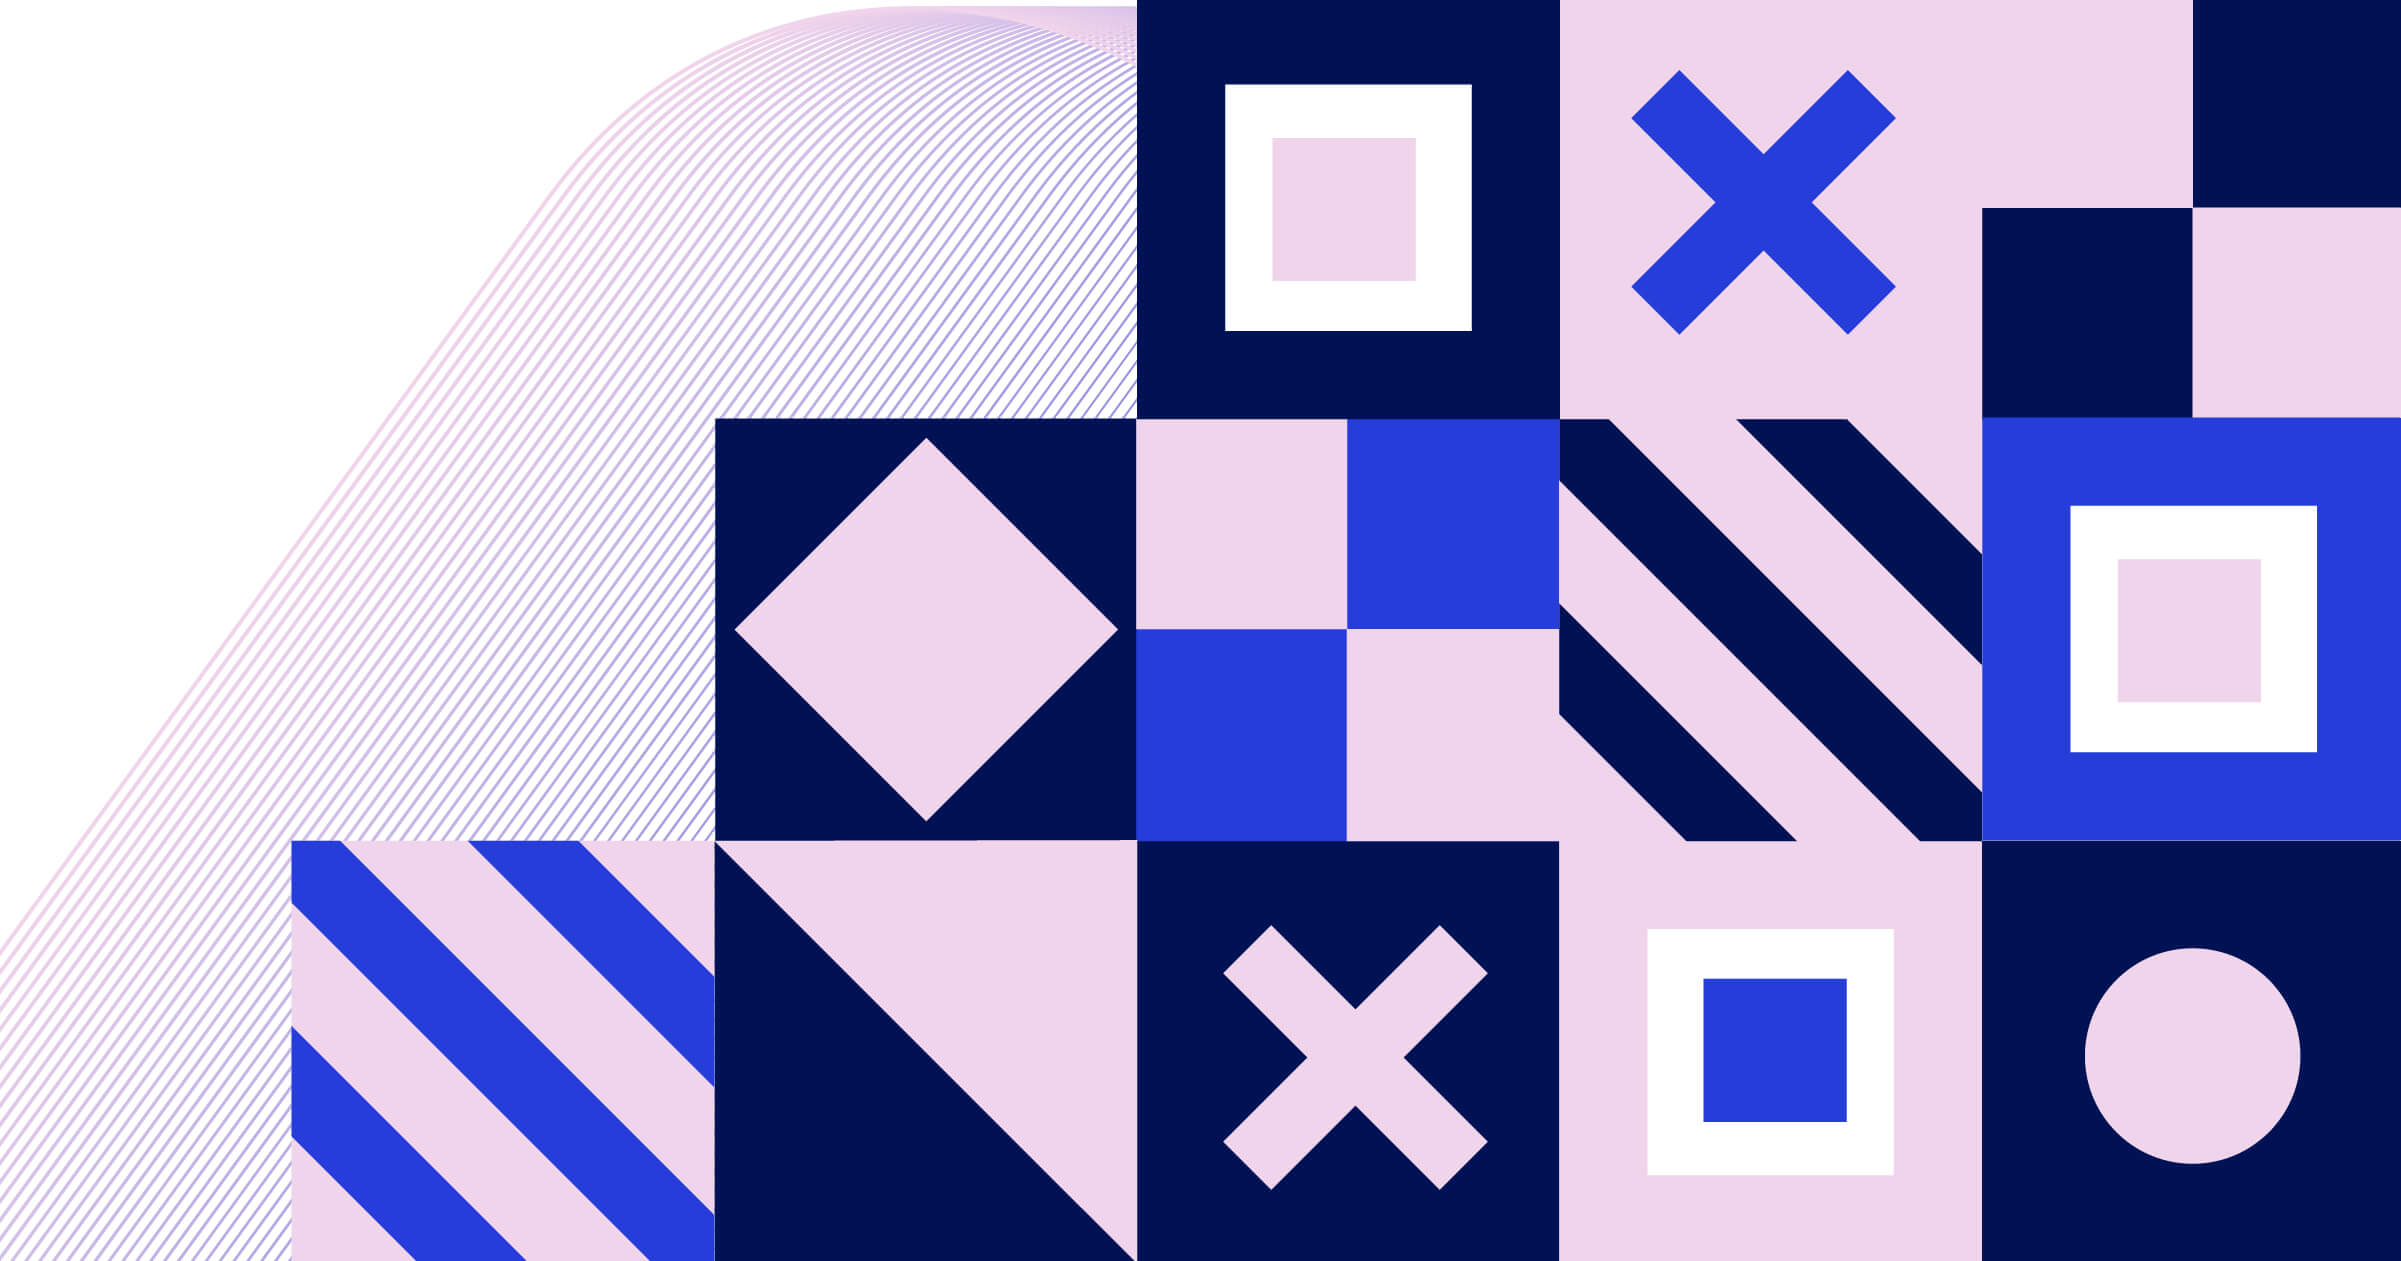 A series of squares are stacked on top of each other, each with a different design overlaid inside of the square. There is a light pink square with diagonal stripes, next to a square made up of two dark blue and light pink triangles. To the right of this, there is a dark blue square with a pink 'x' in the middle. The design continues, with 3 rows total and 3, 4, and 5 squares in each row from the top to bottom of the card.